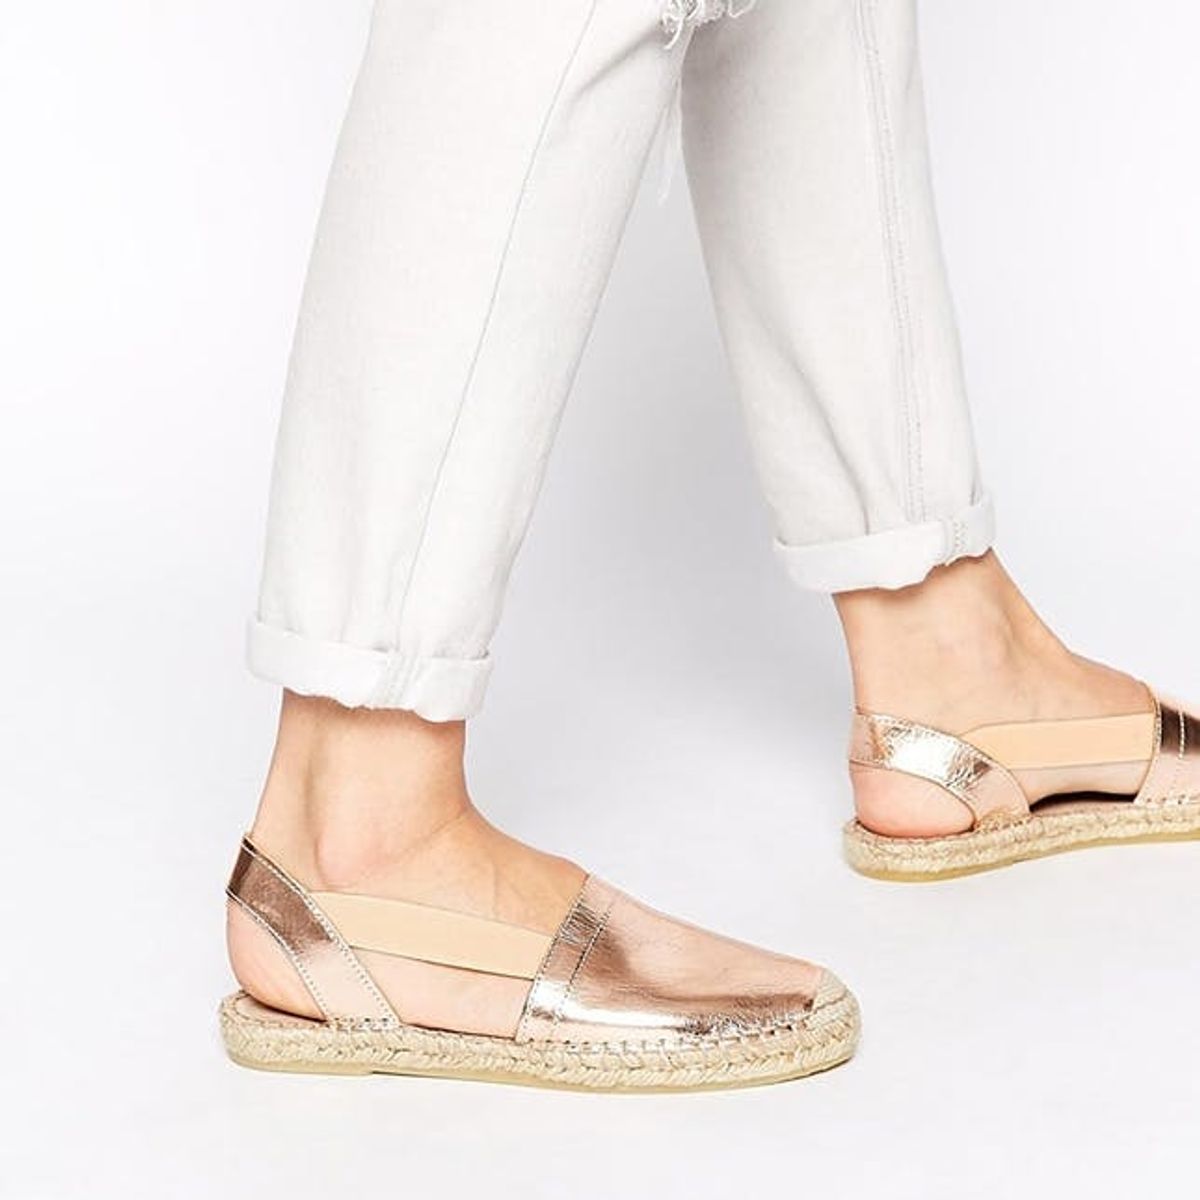 16 Espadrilles All of Your Summer Outfits Need